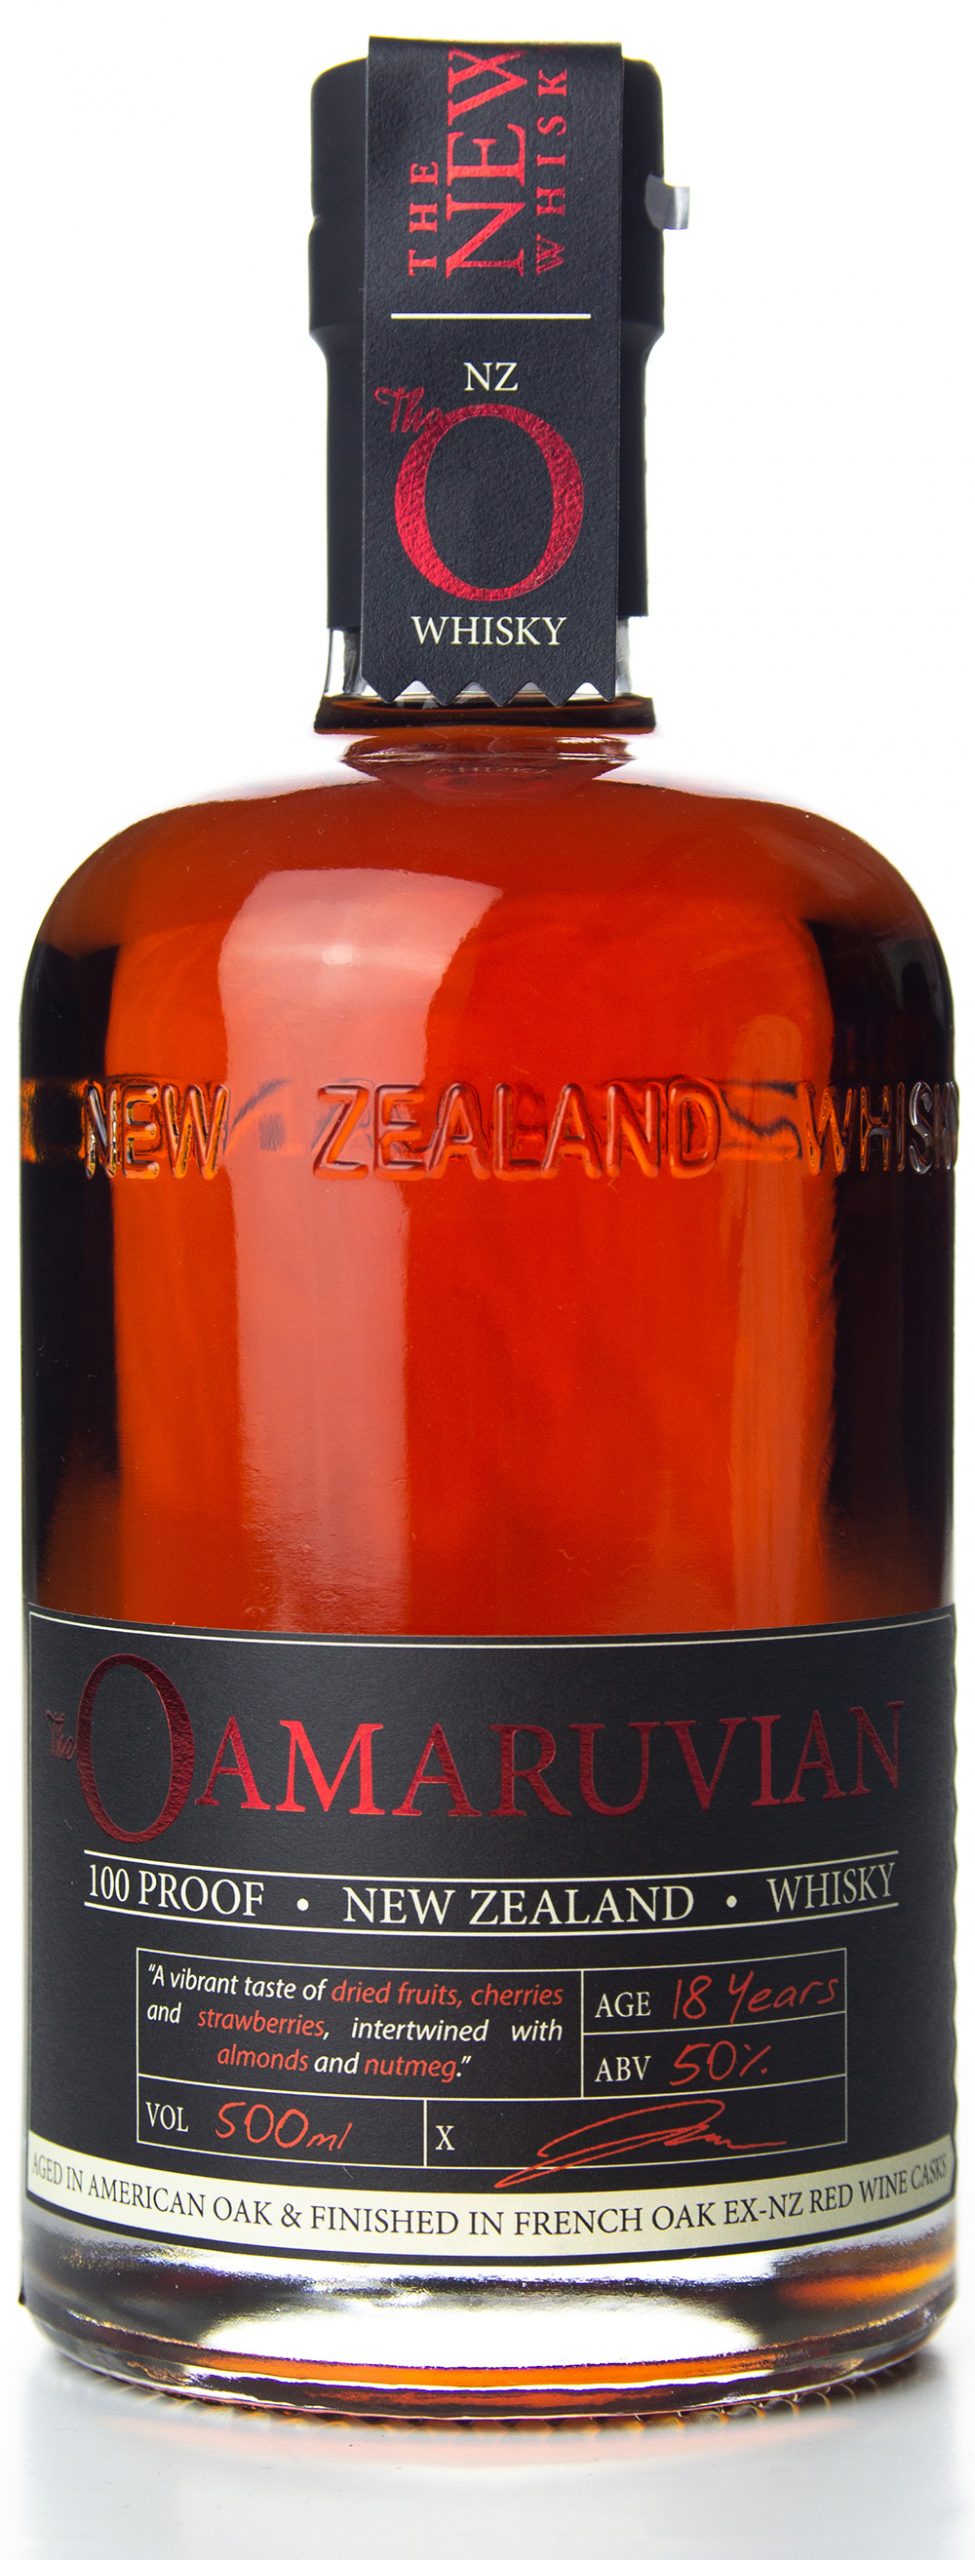 The New Zealand Whisky Collection Dunedin DoubleWood